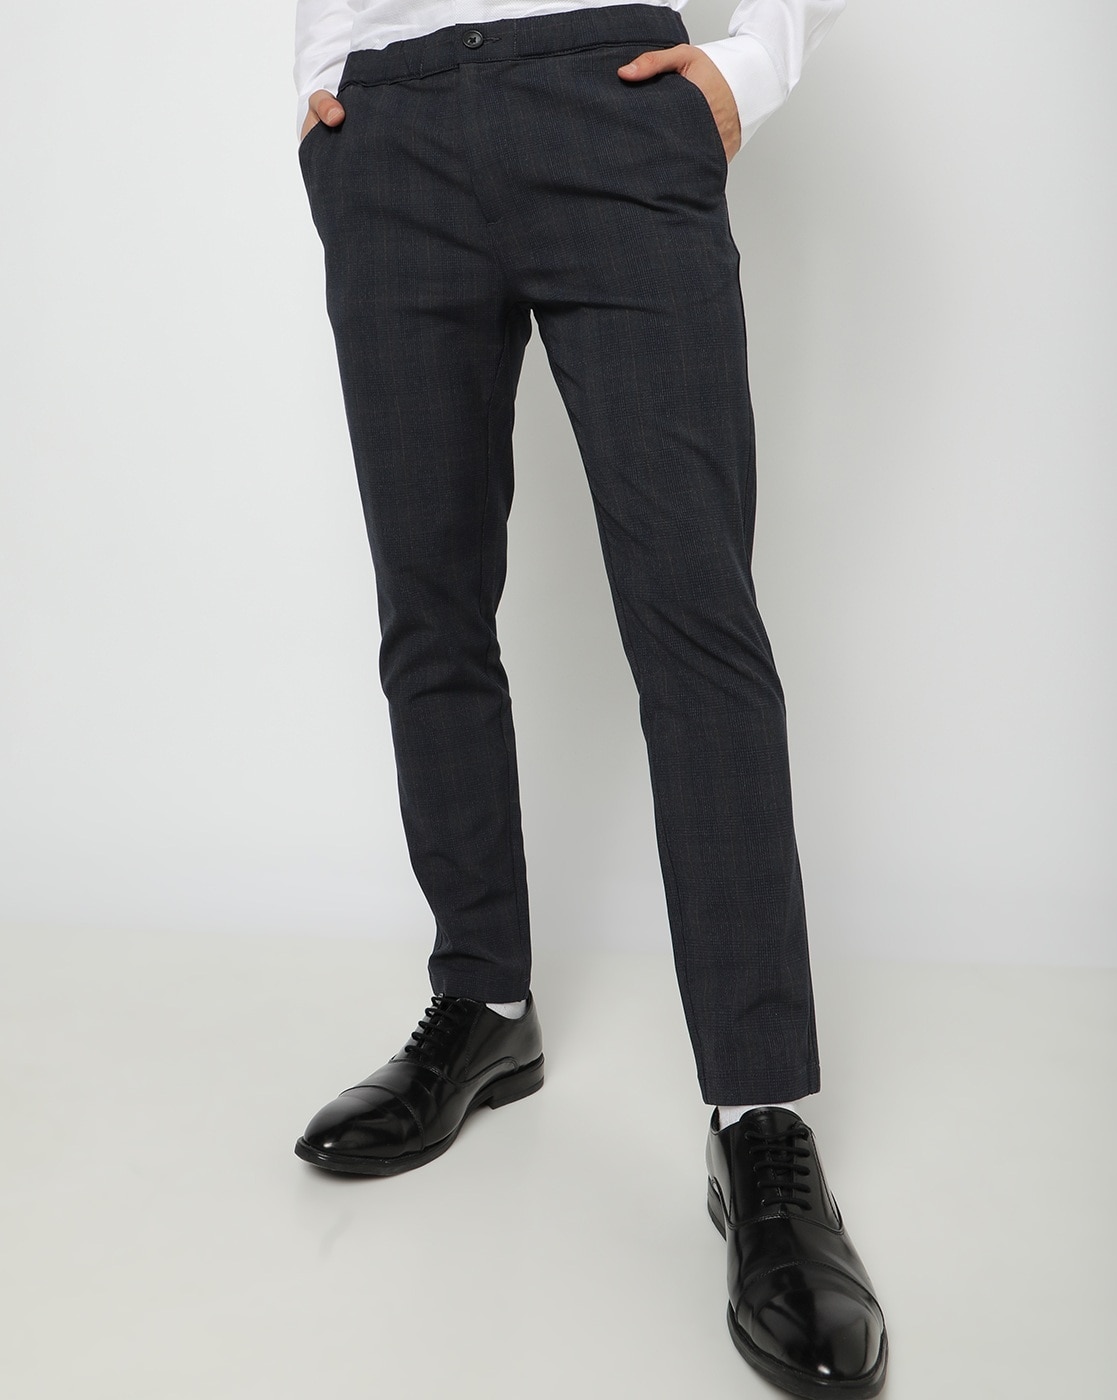 Buy Black Coffee Charcoal Grey Formal Trousers  Trousers for Men 1847796   Myntra